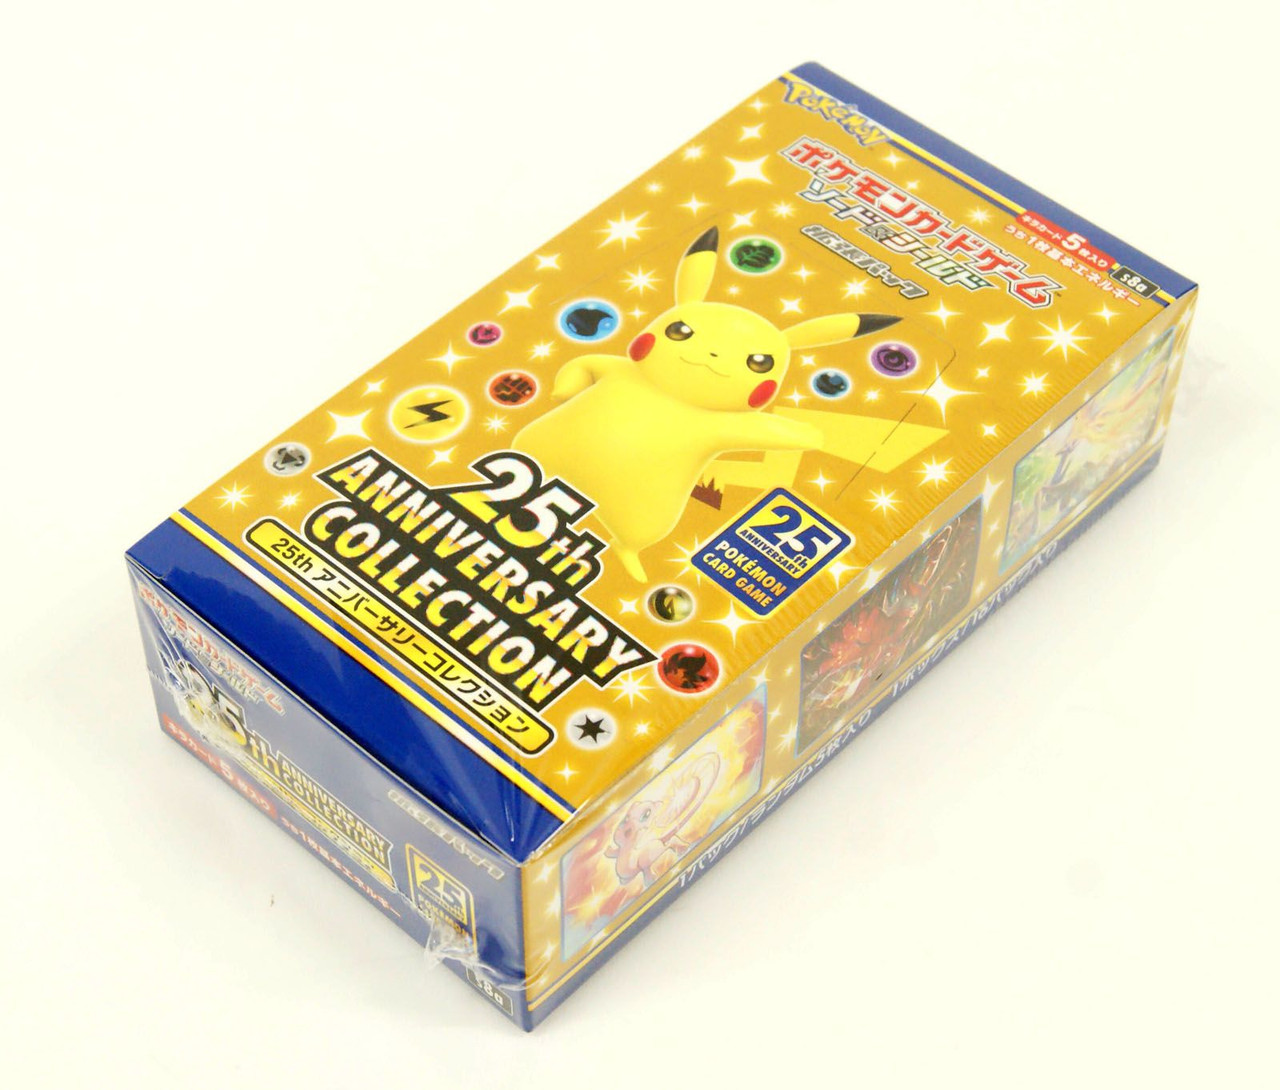 Cartes Pokemon s8a 25th Anniversary Collection Pack1